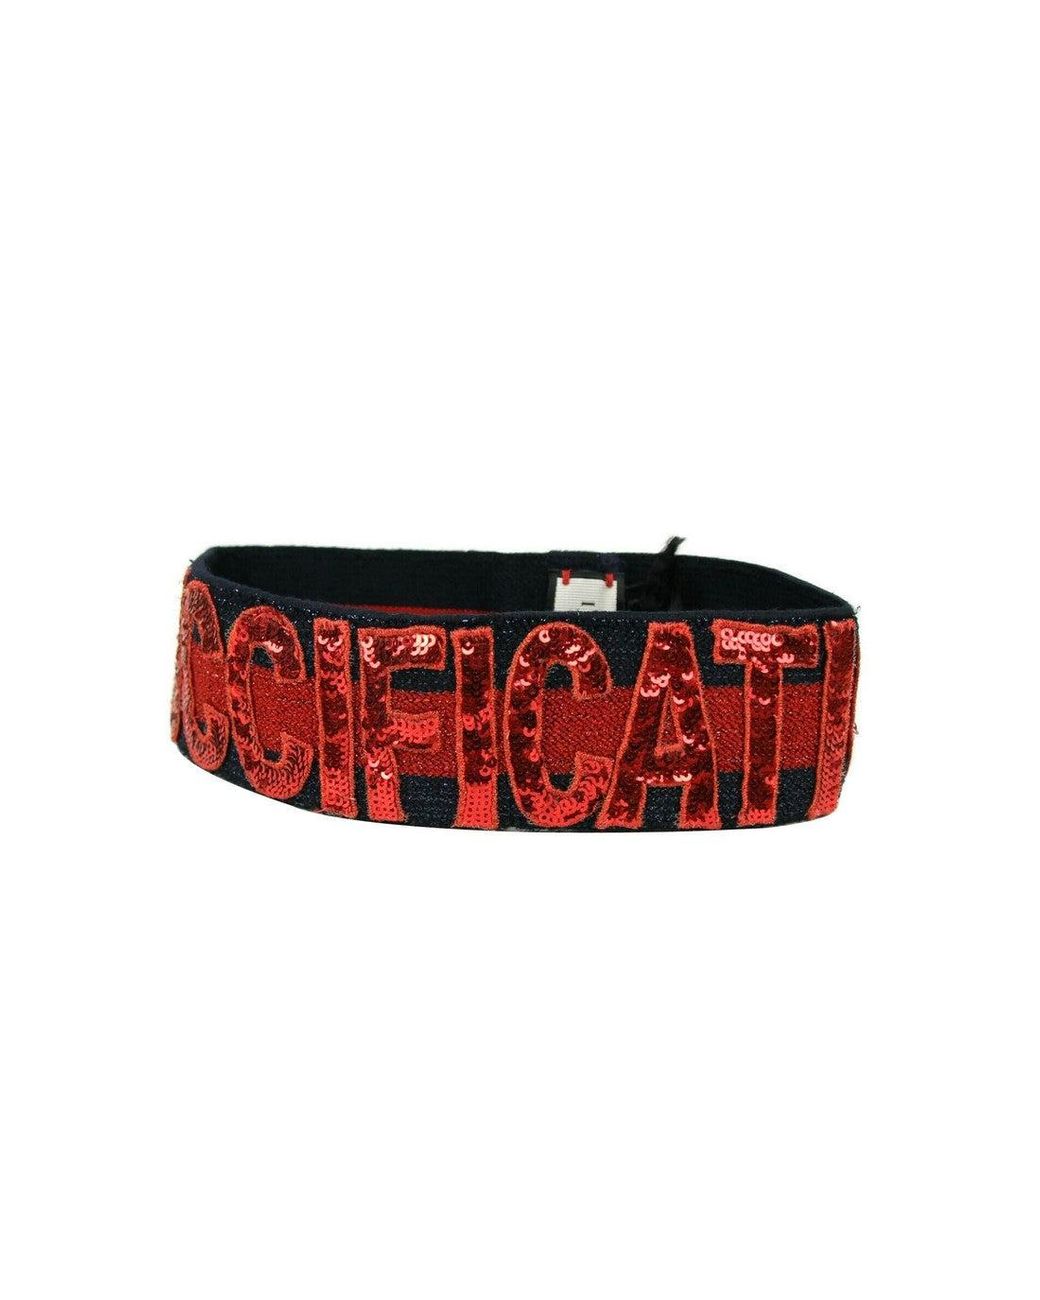 Gucci Sequin Patches "fication" Headband M / 57 499679 4174 in Red | Lyst